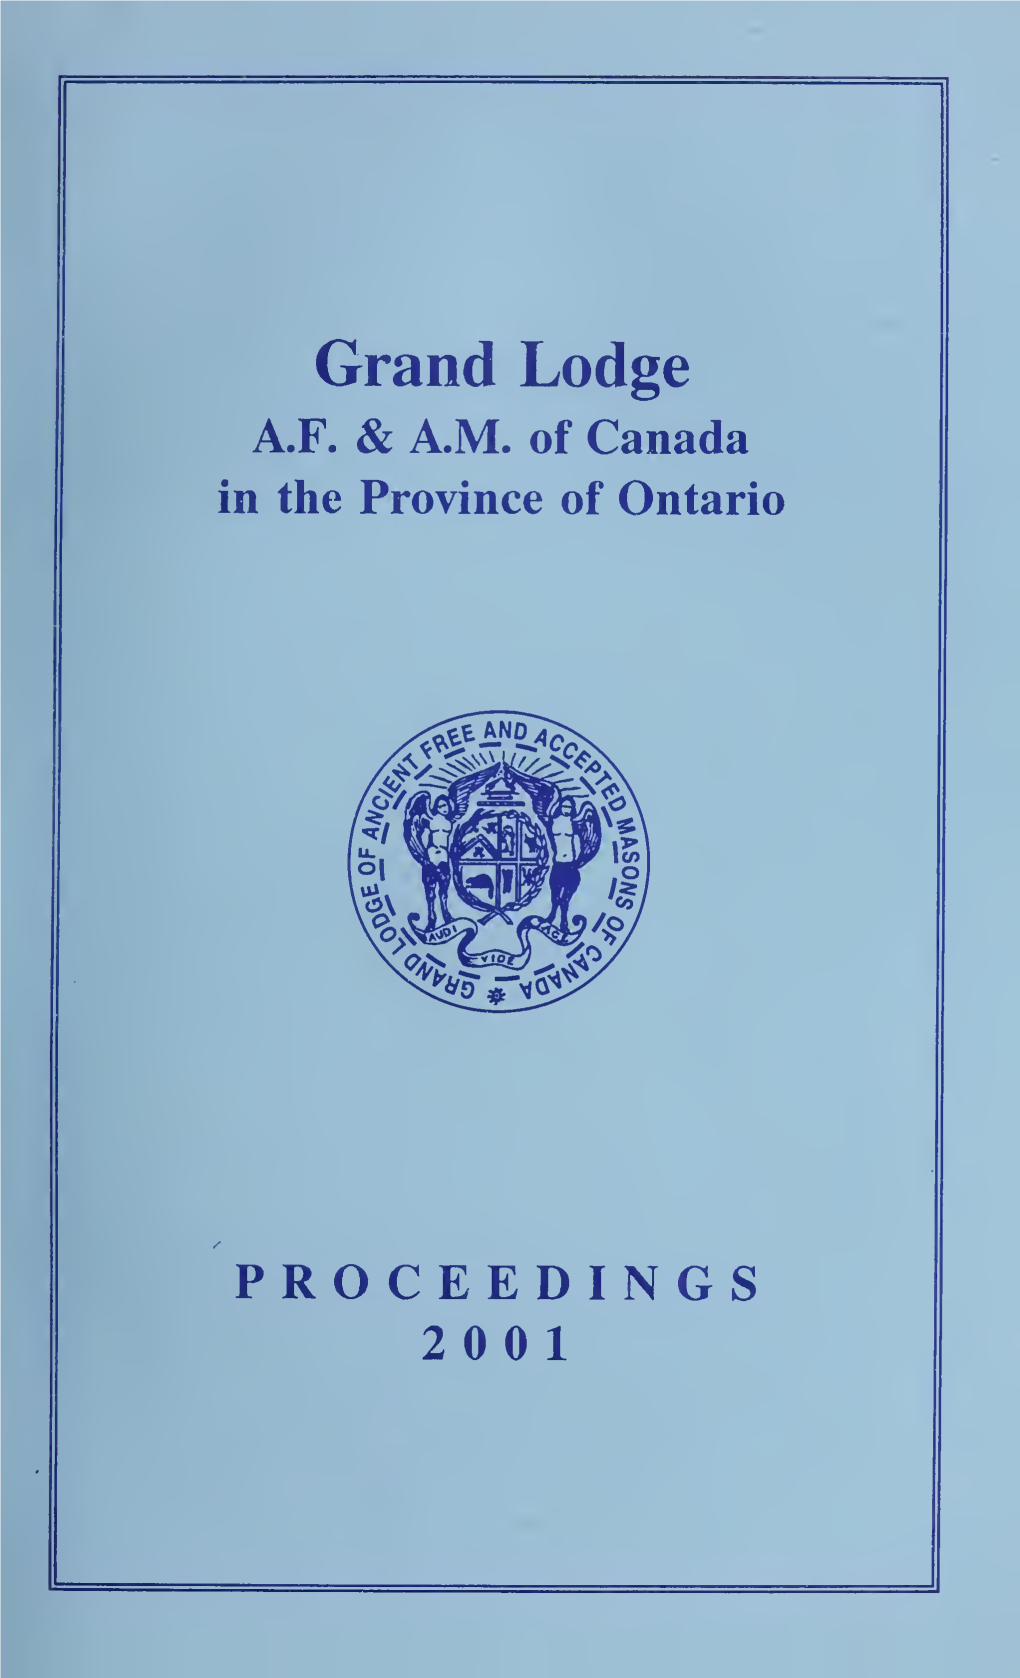 Proceedings: Grand Lodge of A.F. & A.M. of Canada, 2001